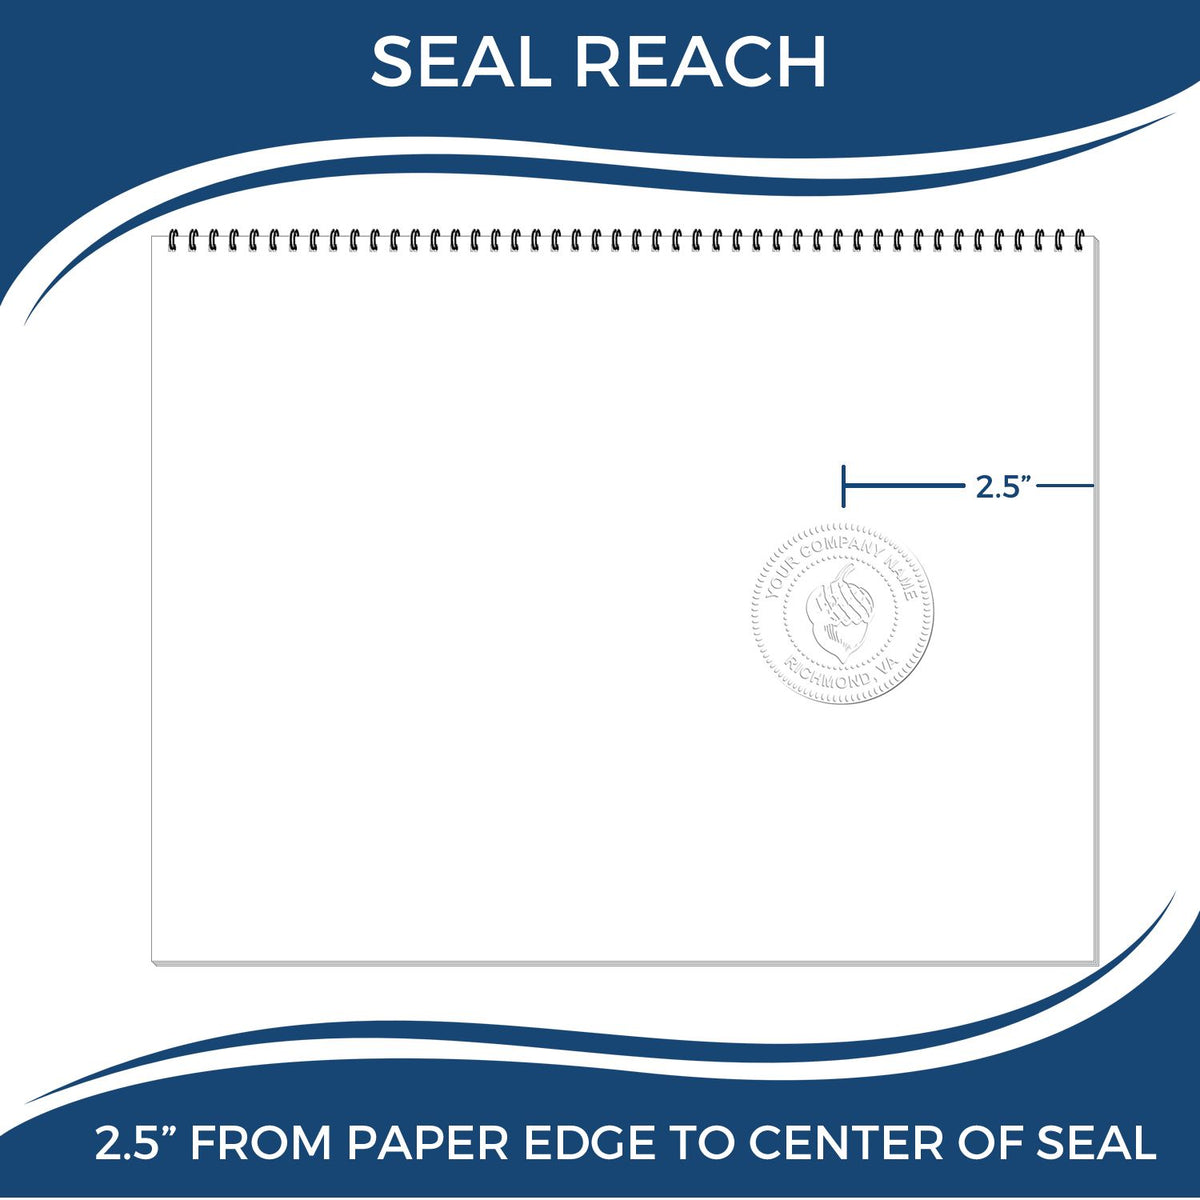 An infographic showing the seal reach which is represented by a ruler and a miniature seal image of the Long Reach Idaho Geology Seal